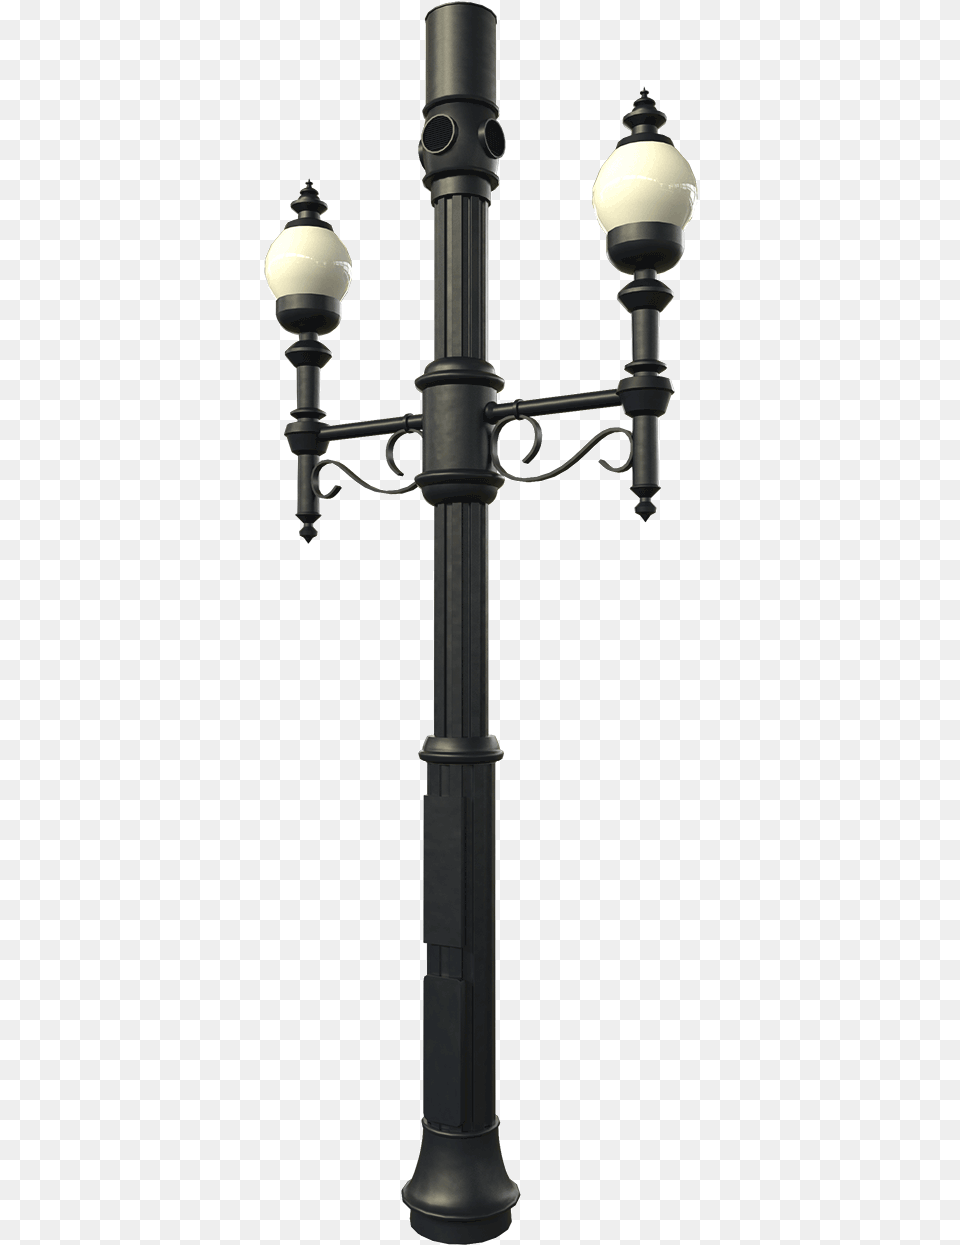 Nepsa Solutions By Proving 3d Renders Of Their Product Column, Lamp, Lamp Post, Chandelier Free Transparent Png